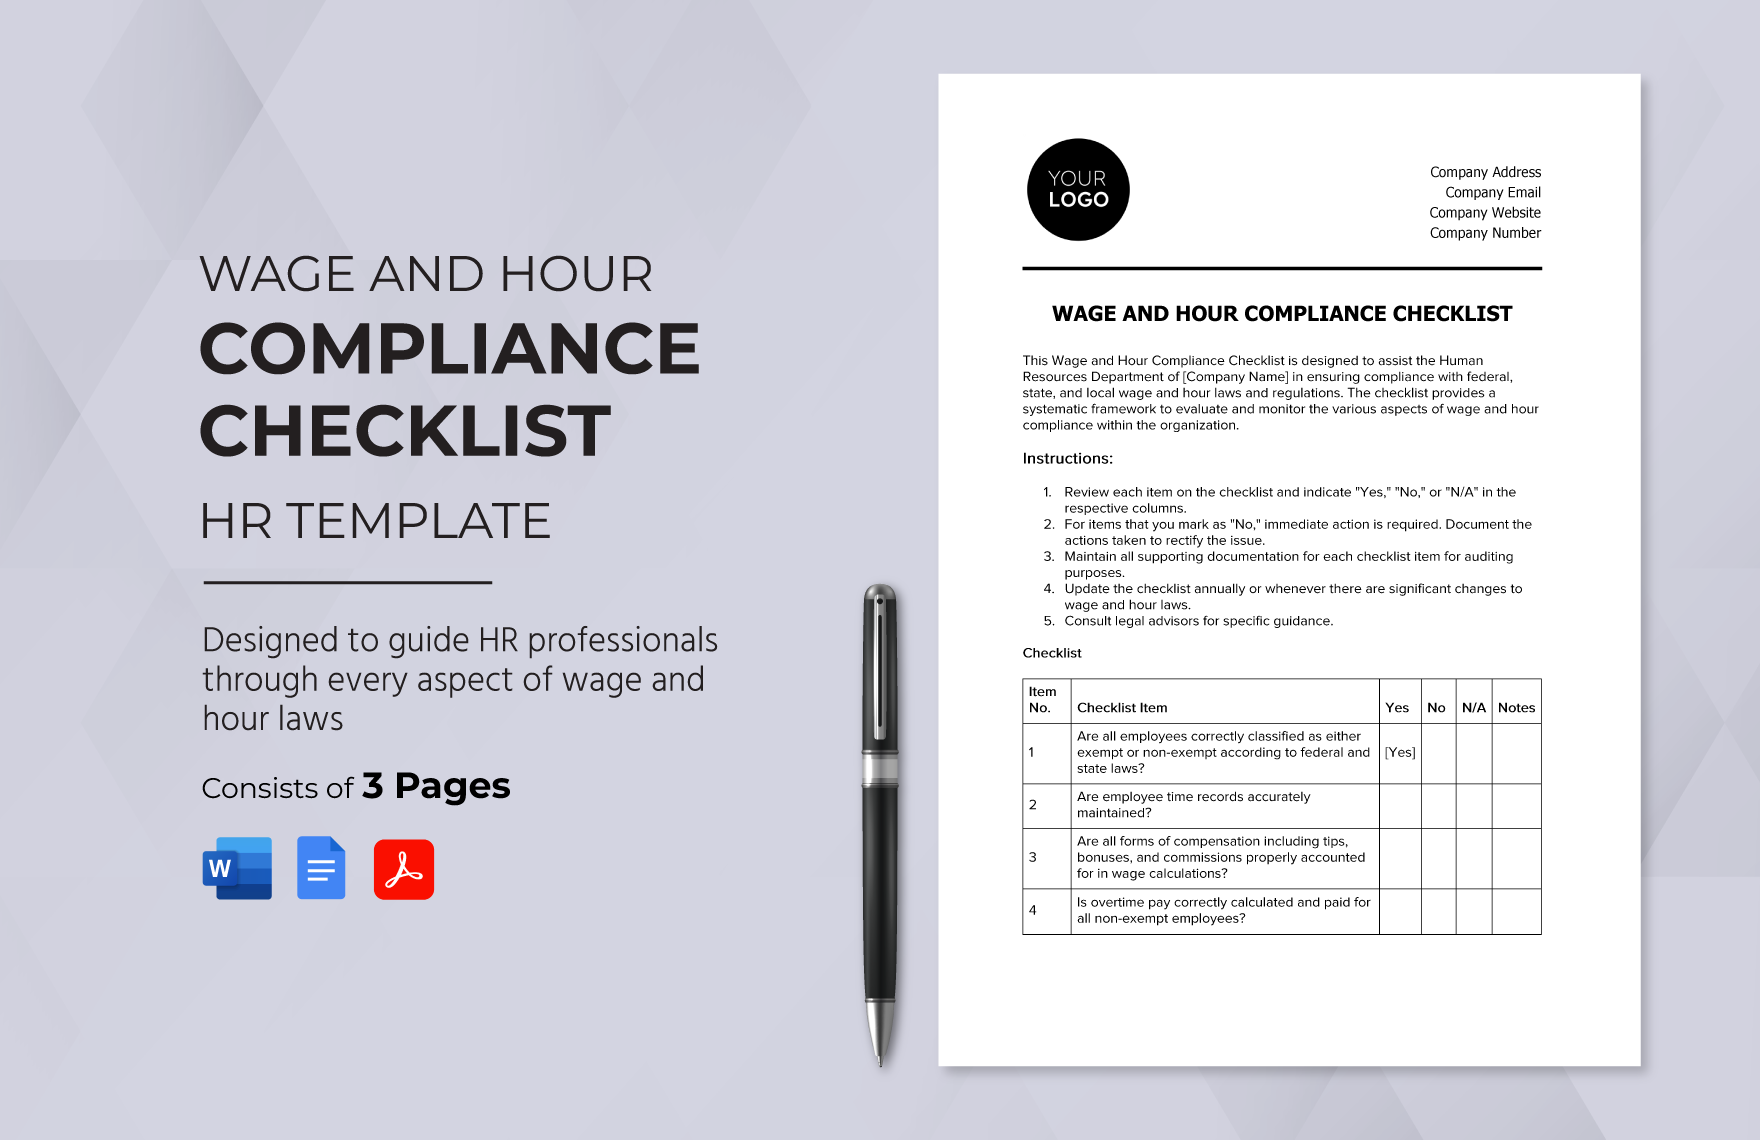 Wage and Hour Compliance Checklist HR Template